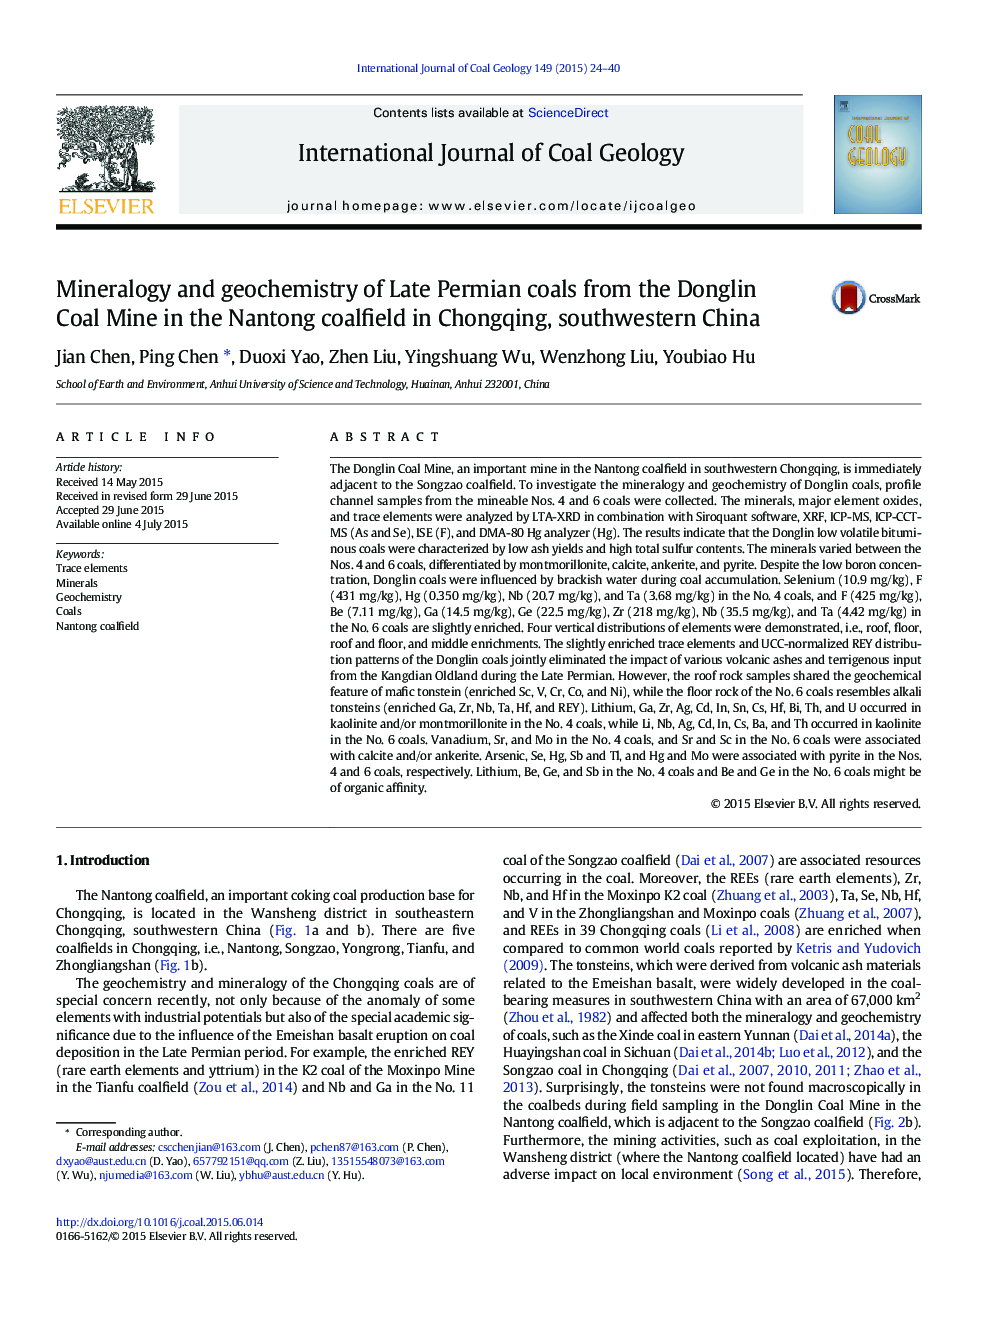 Mineralogy and geochemistry of Late Permian coals from the Donglin Coal Mine in the Nantong coalfield in Chongqing, southwestern China